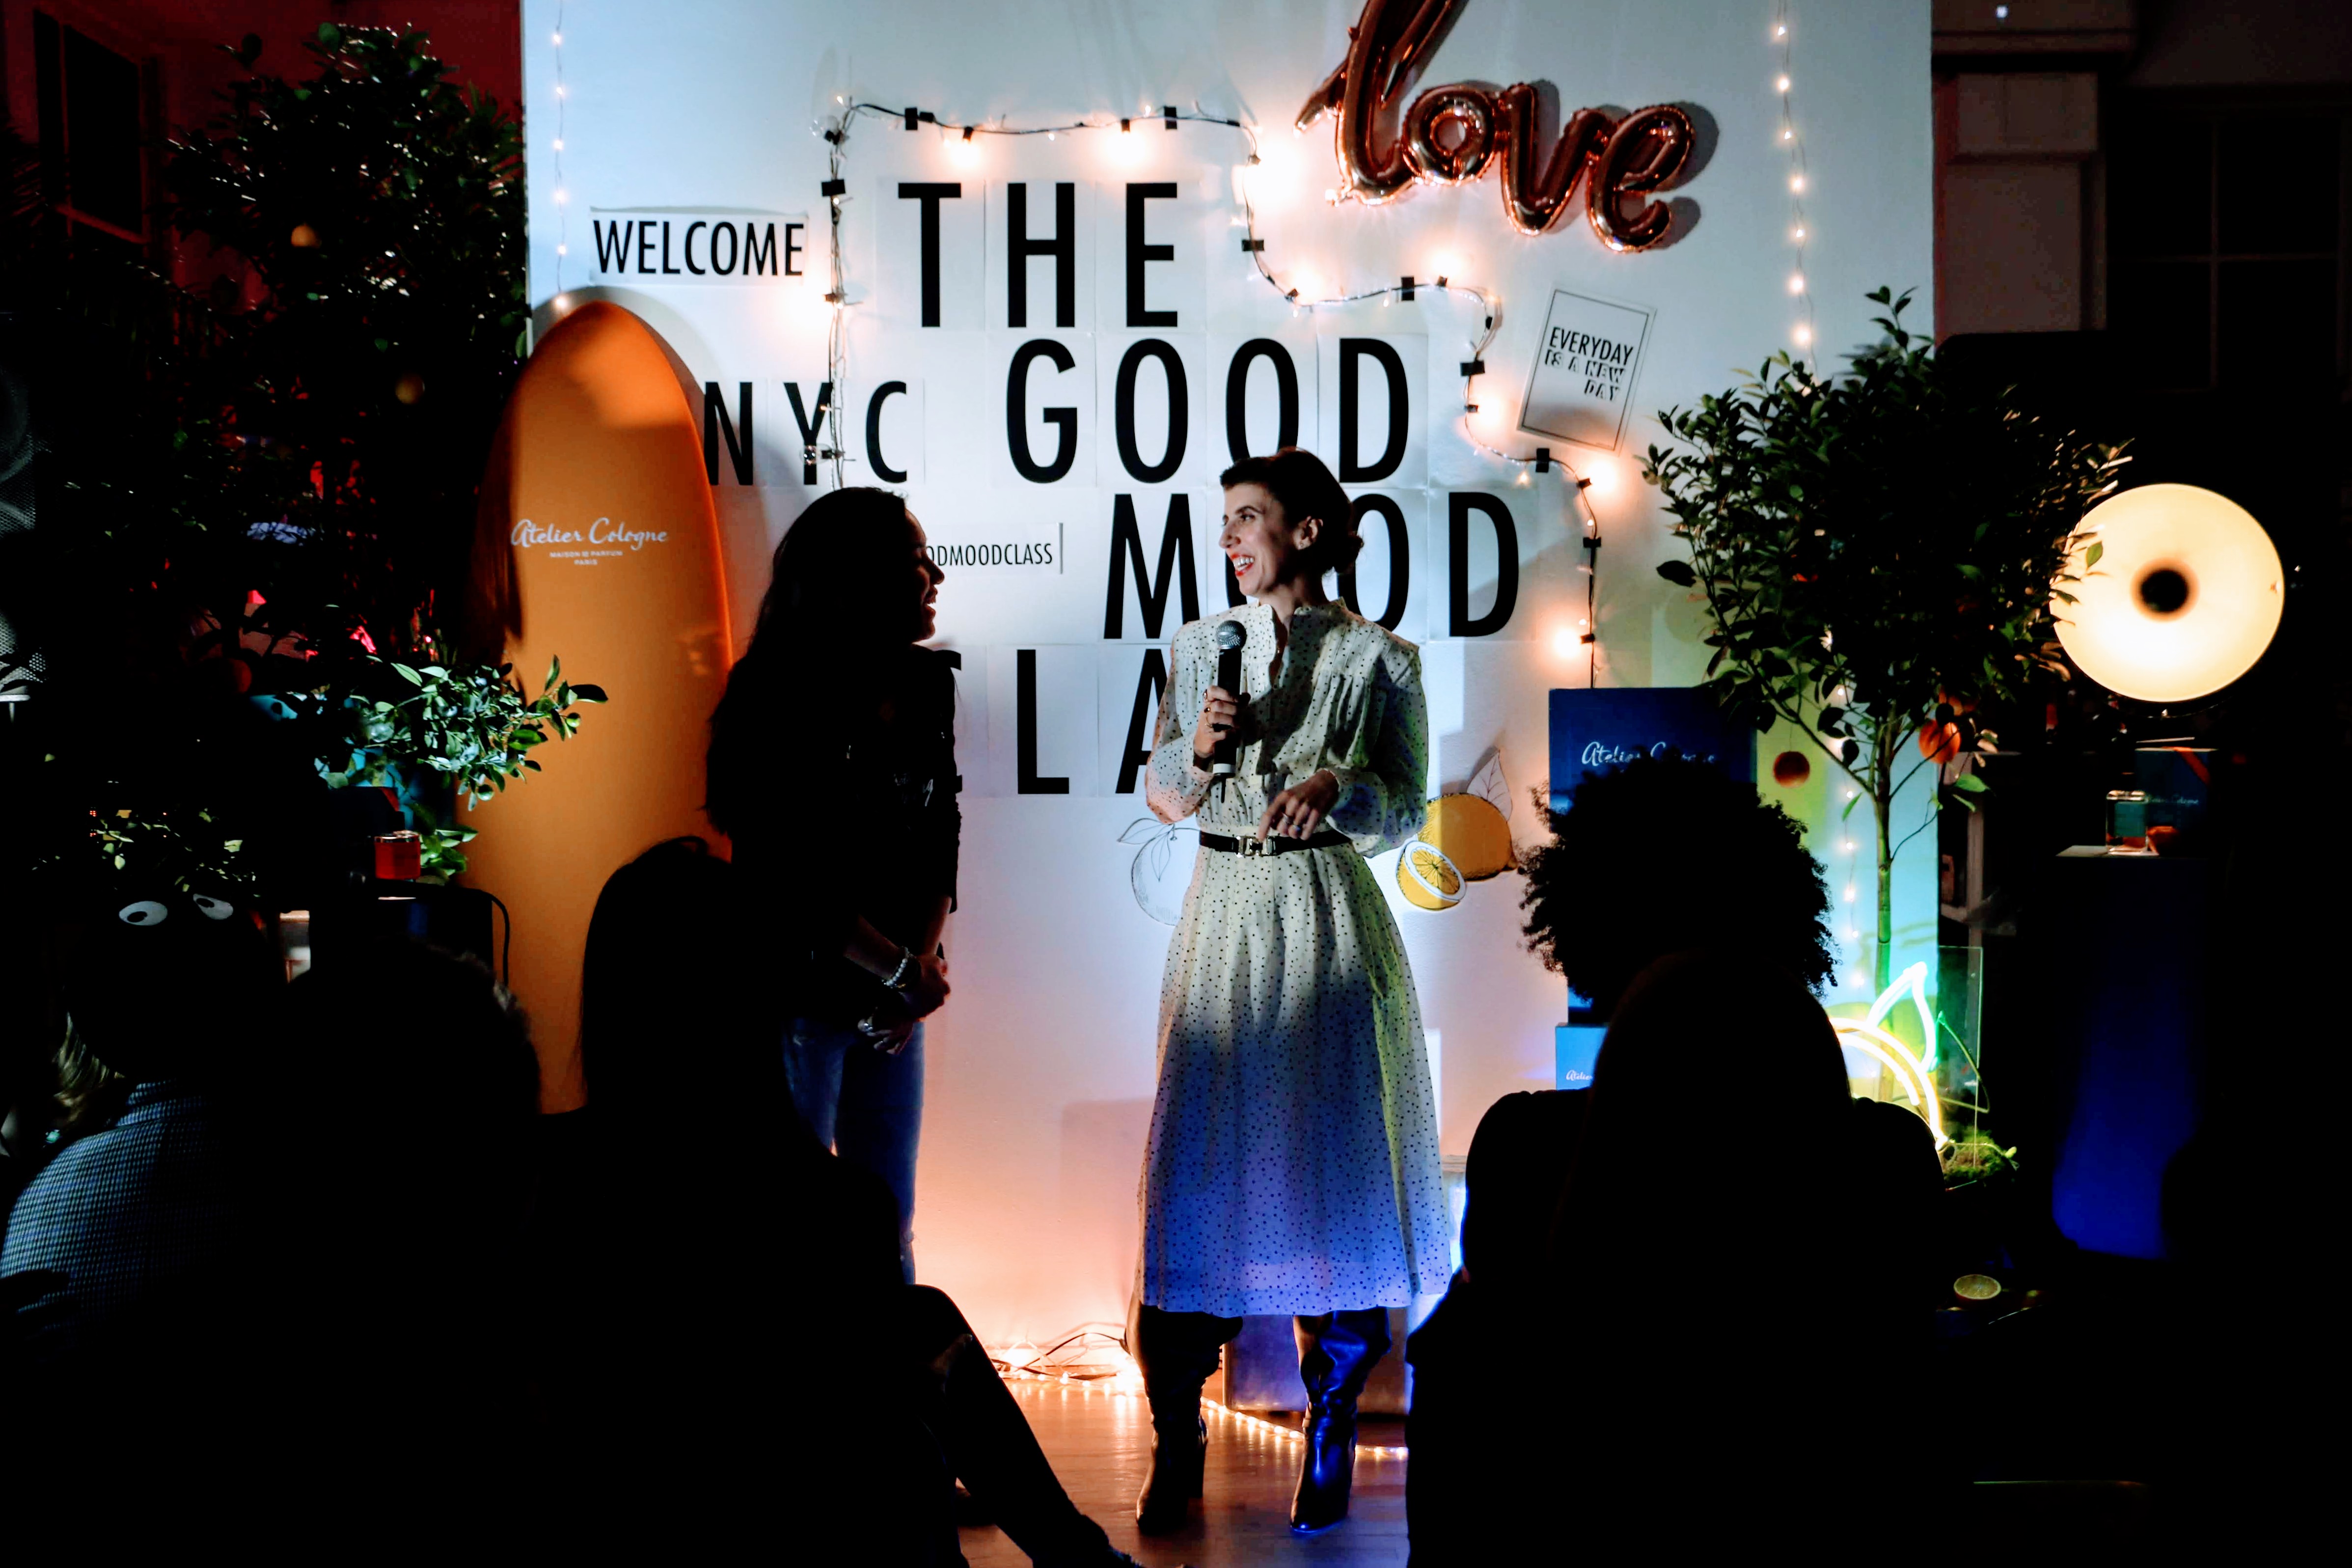 The Good Mood Class @Atelier Cologne